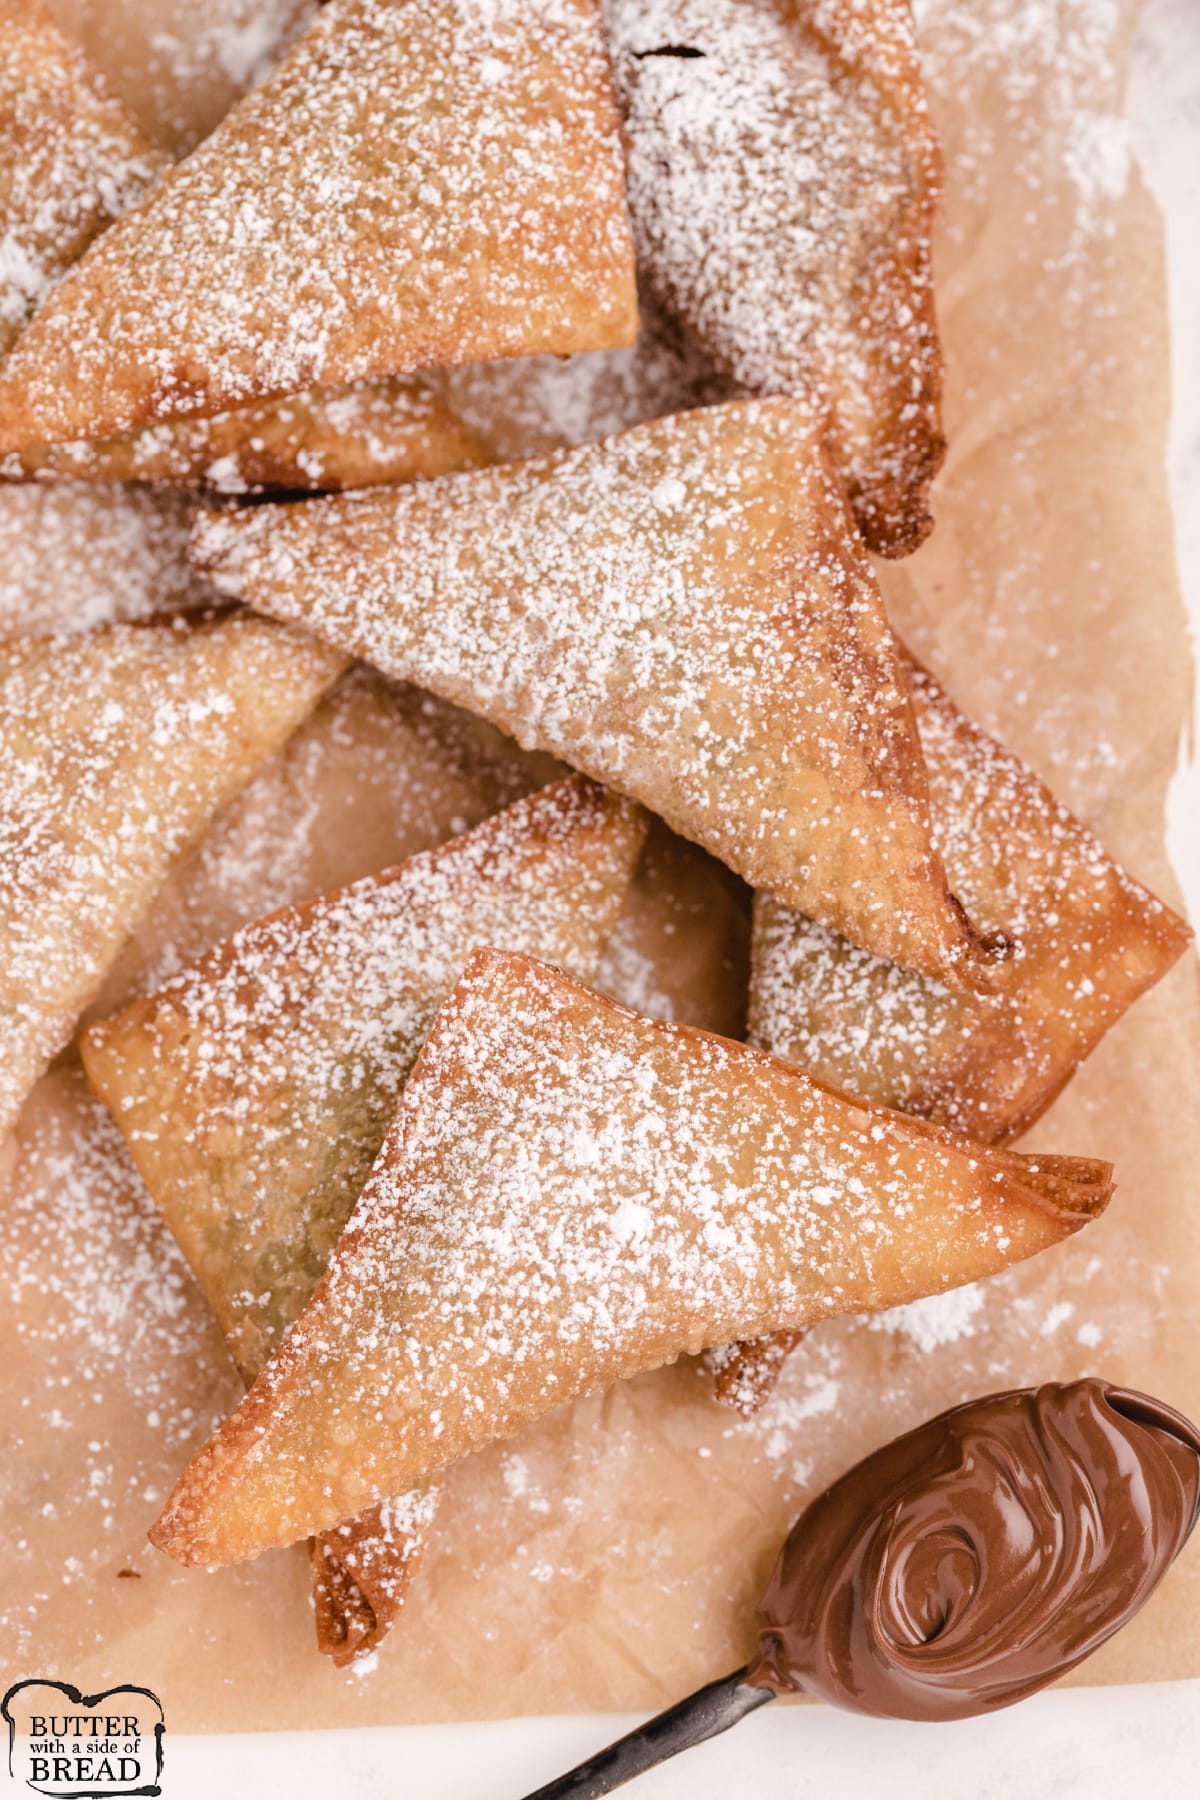 Simple fried pastry filled with Nutella 